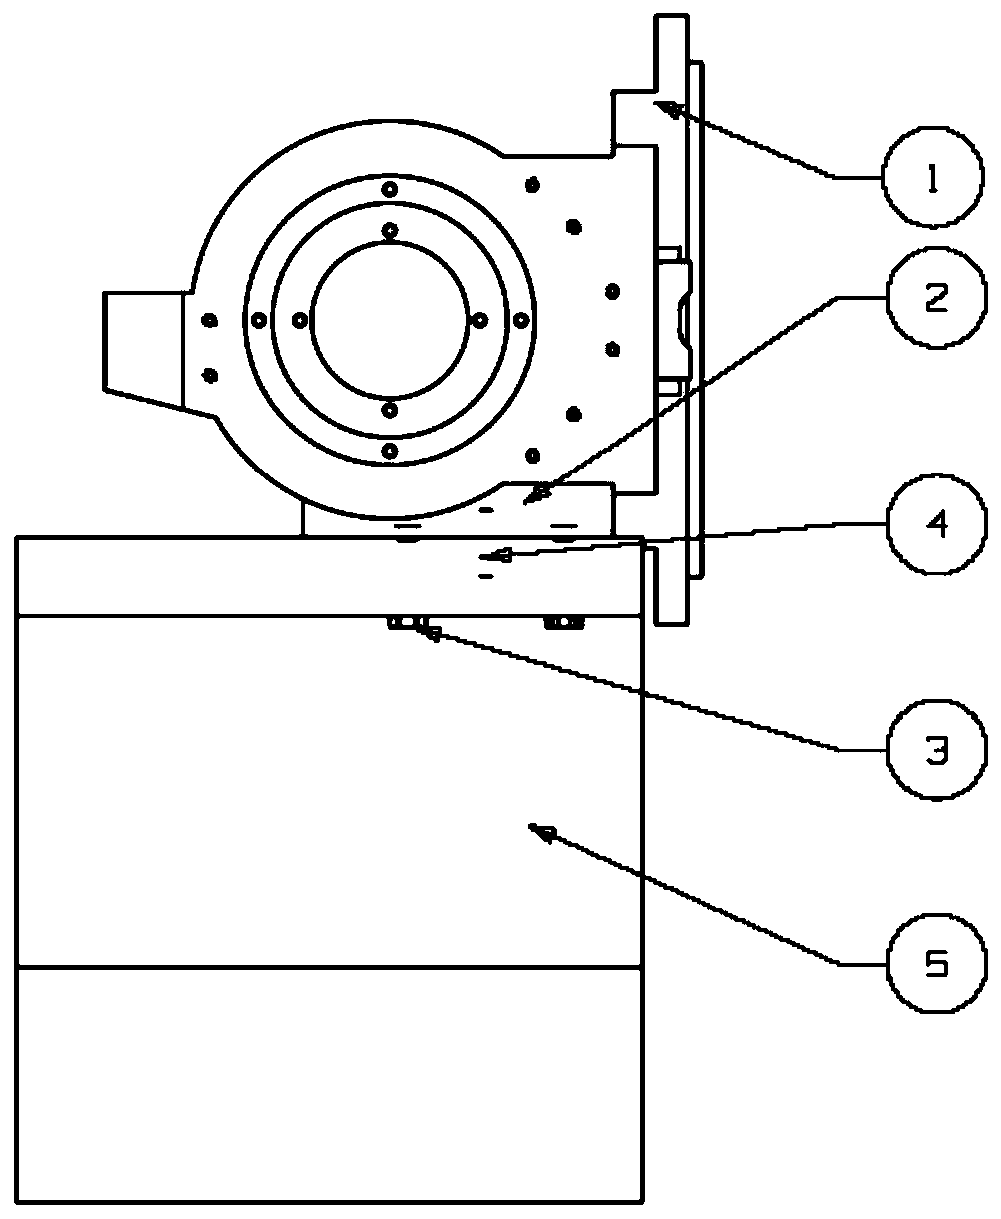 Positioning method for low-bending-moment clamping of small clamping surface of complex bracket part